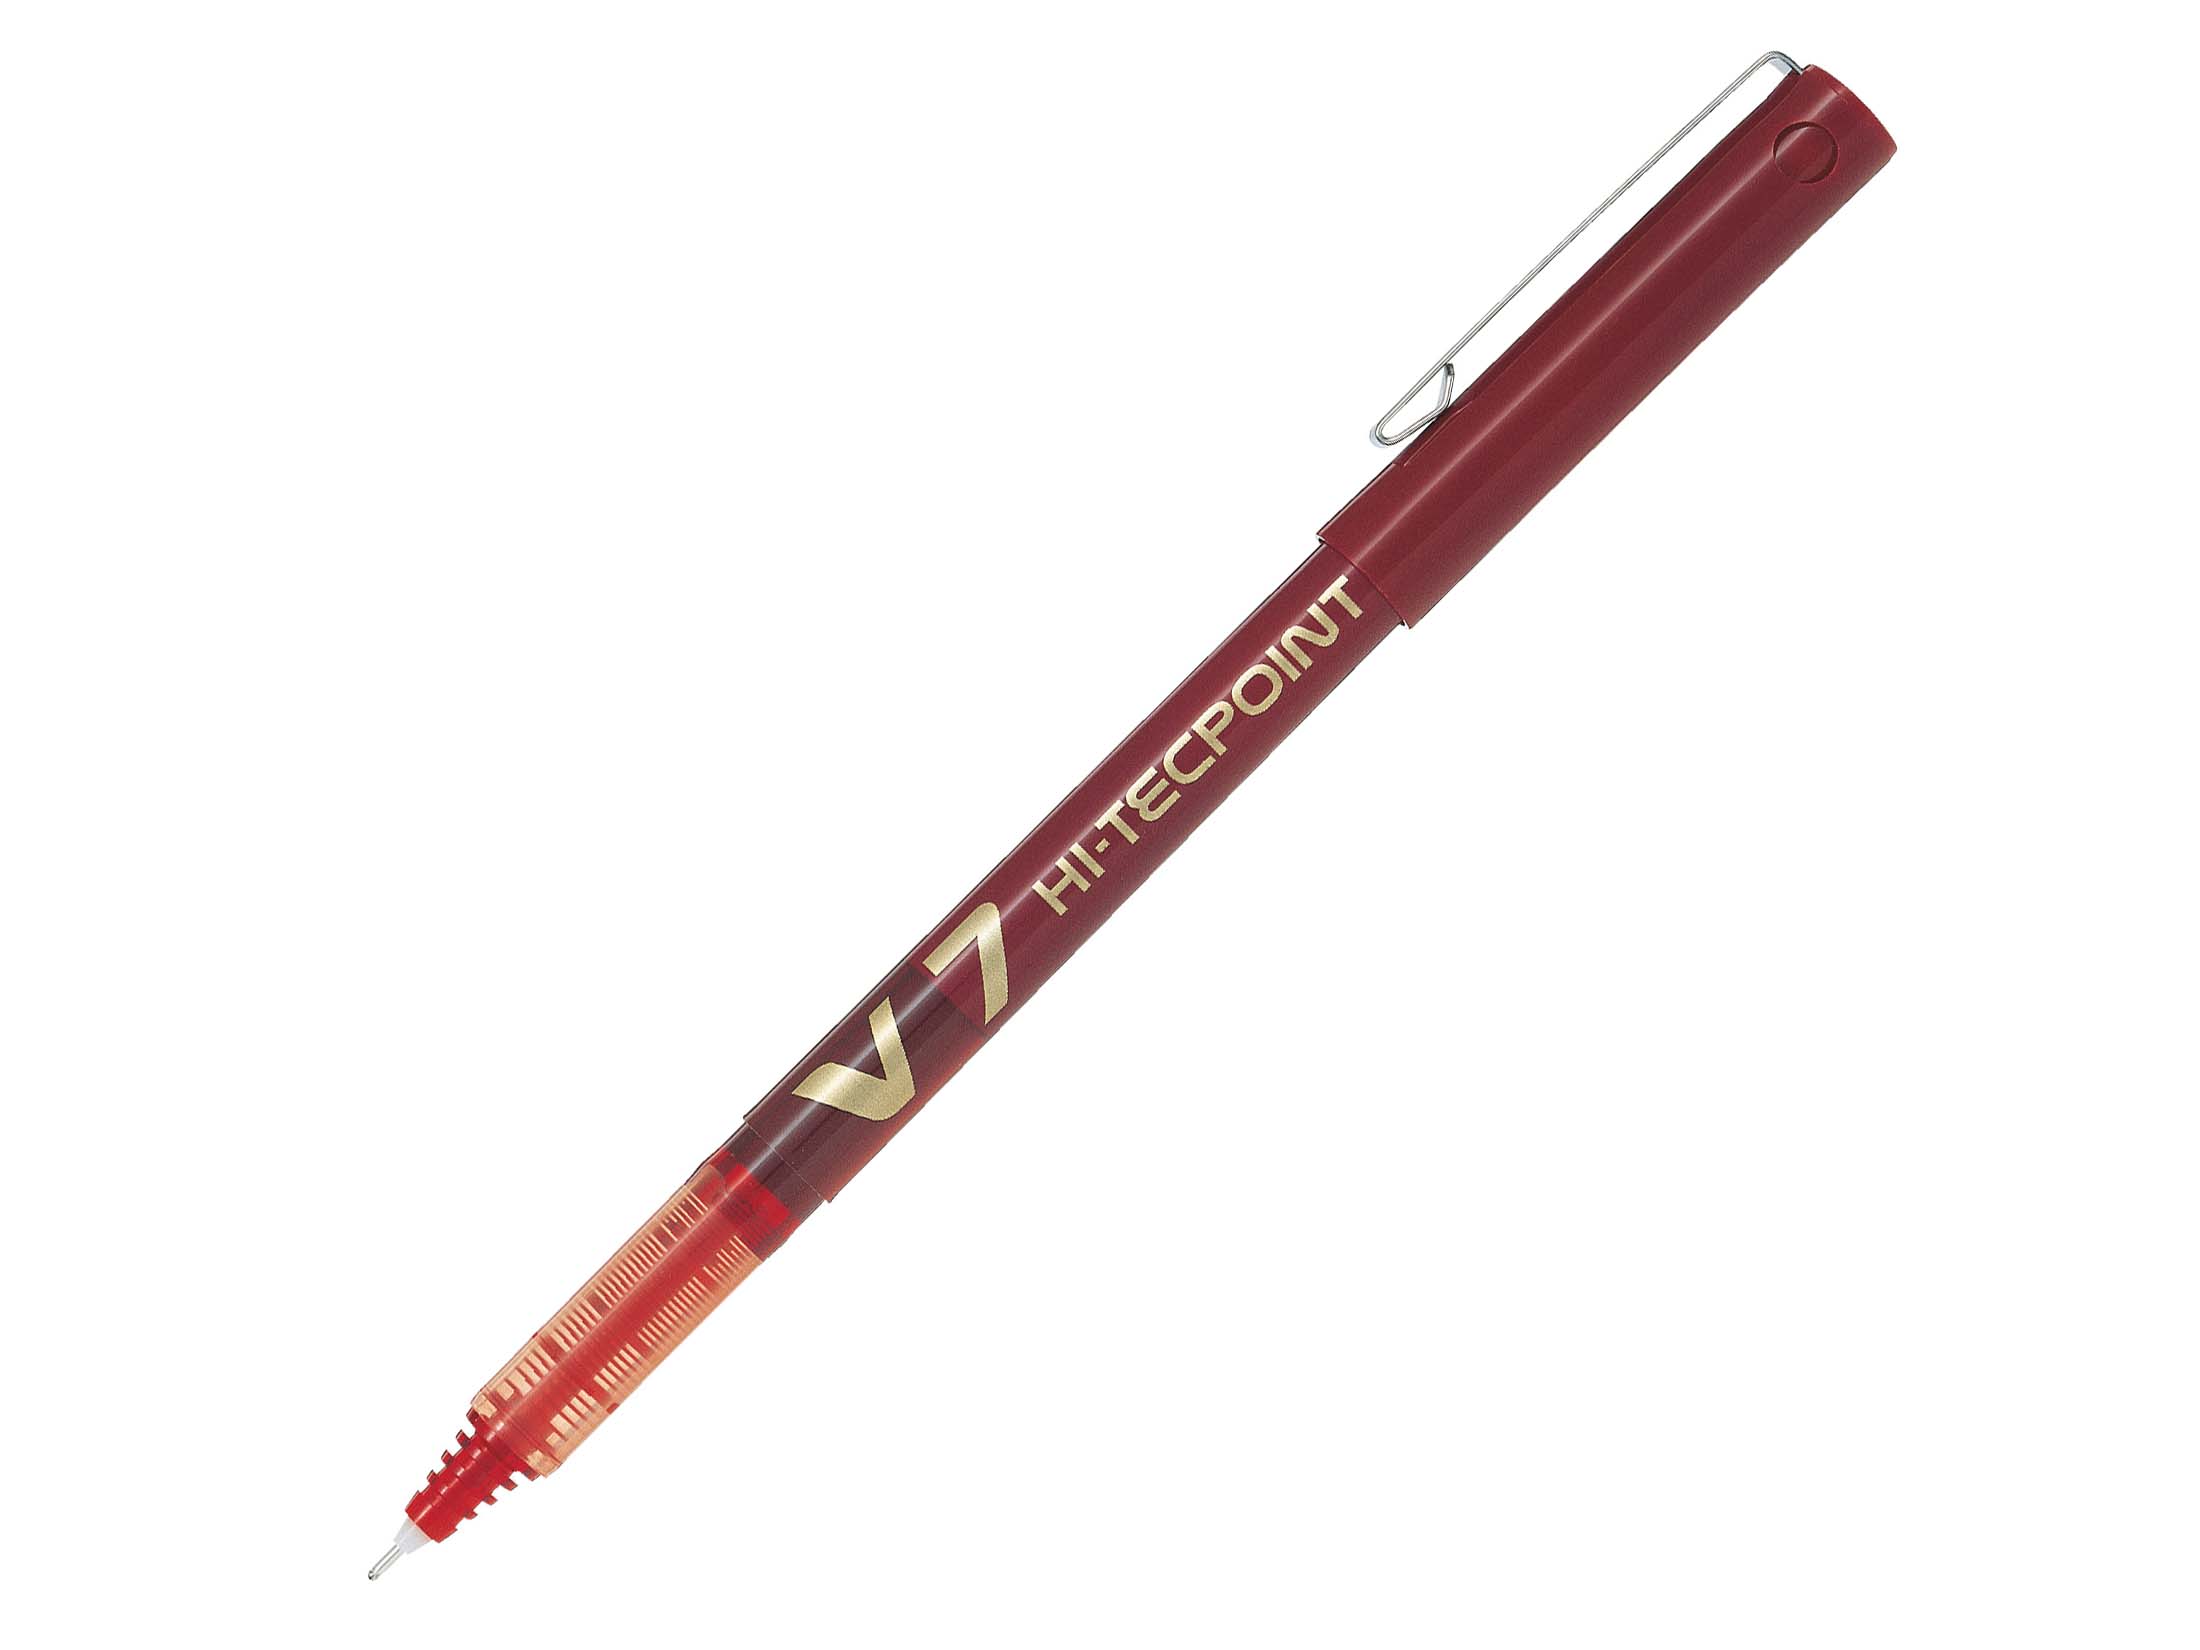 Stylo-roller encre liquide - V7 - Pointe moyenne - rouge